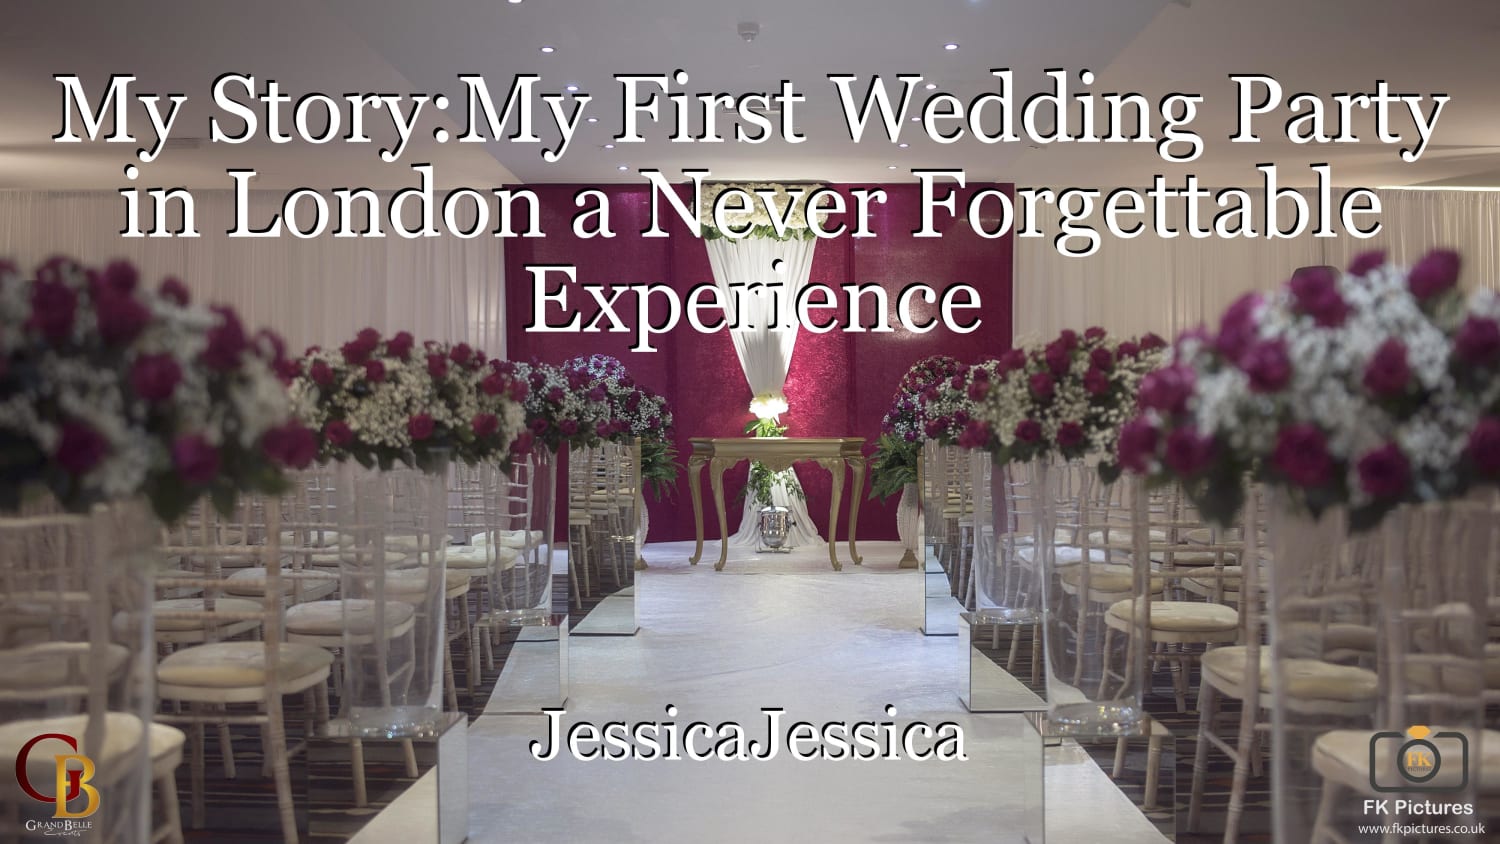 My Story:My First Wedding Party in London a Never Forgettable Experience